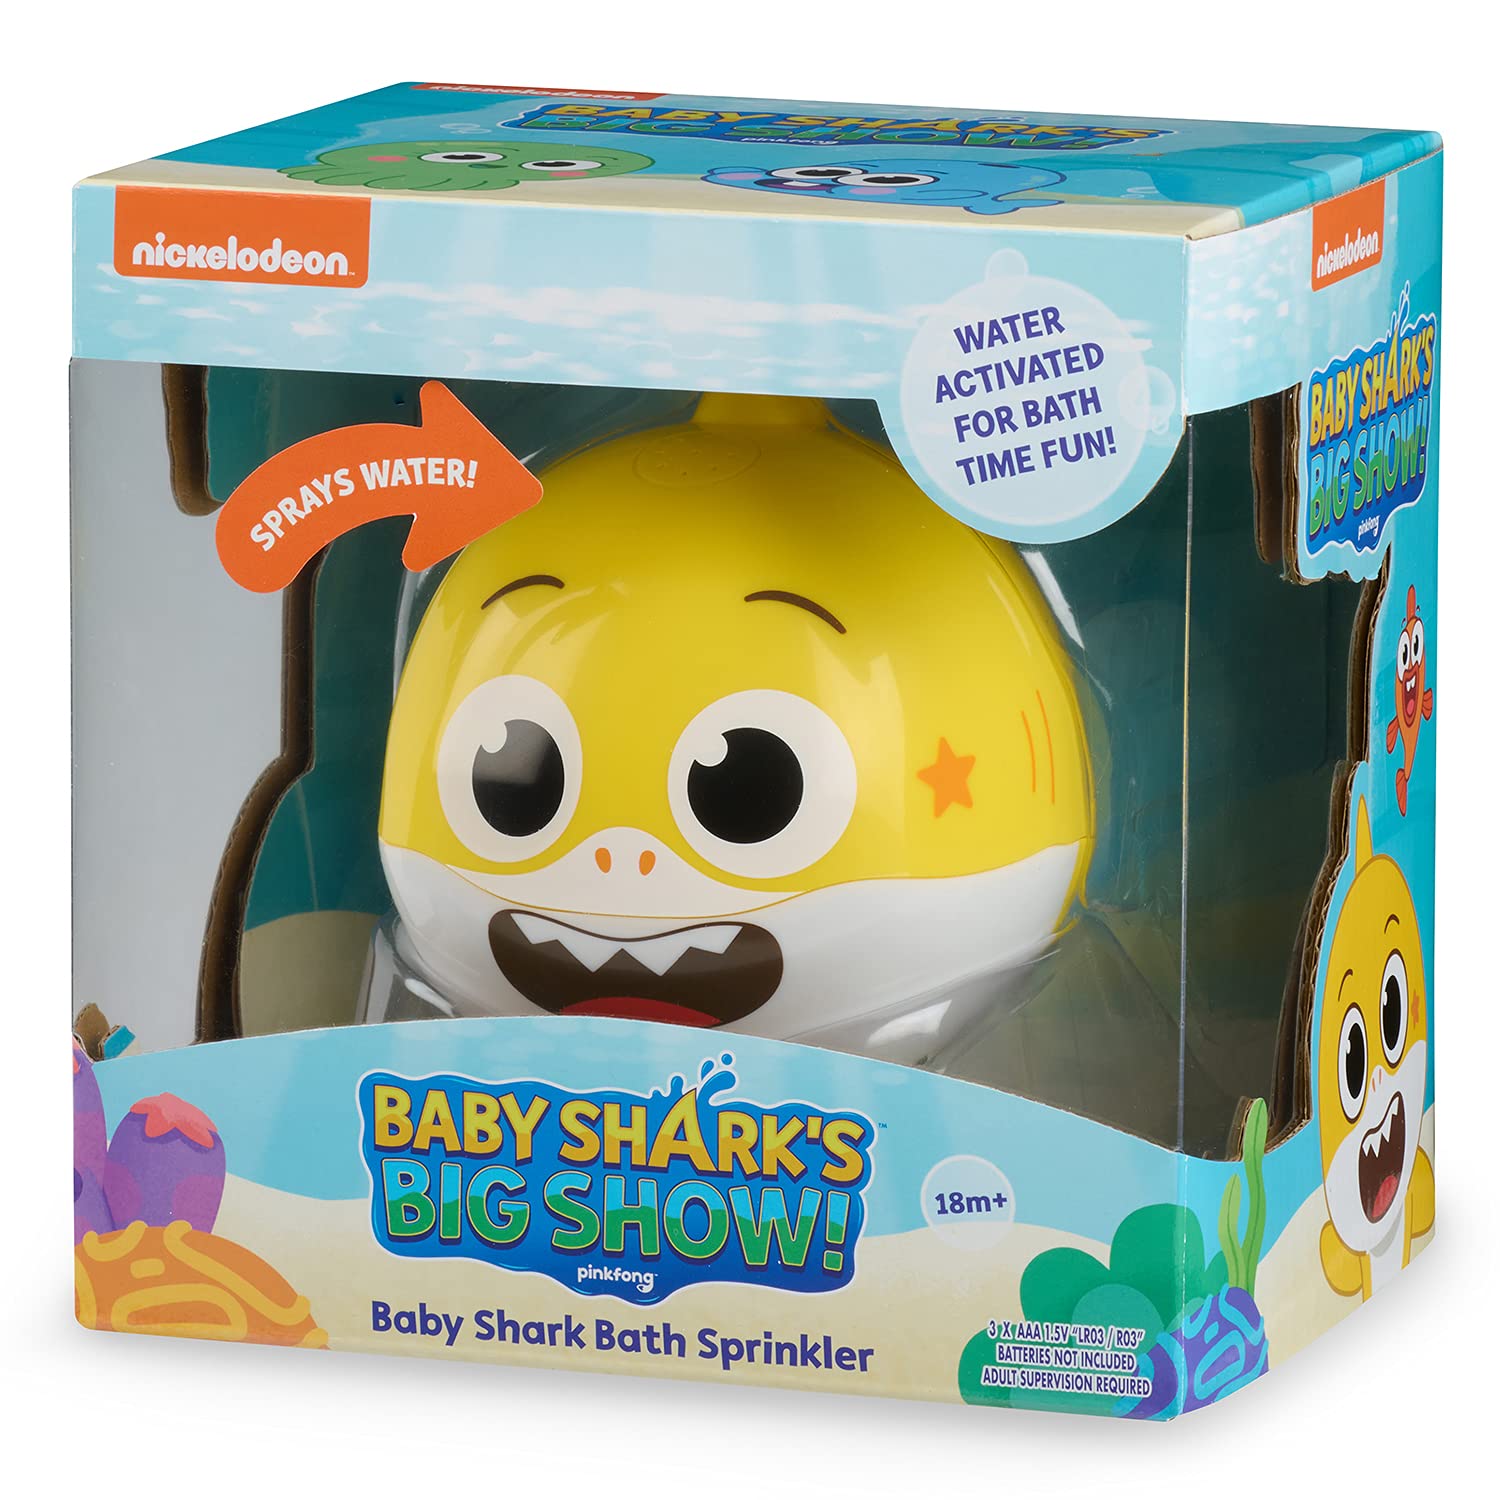 WowWee Baby Shark's Big Show! Bath Sprinkler and Water Toy – Kids Bath Toys